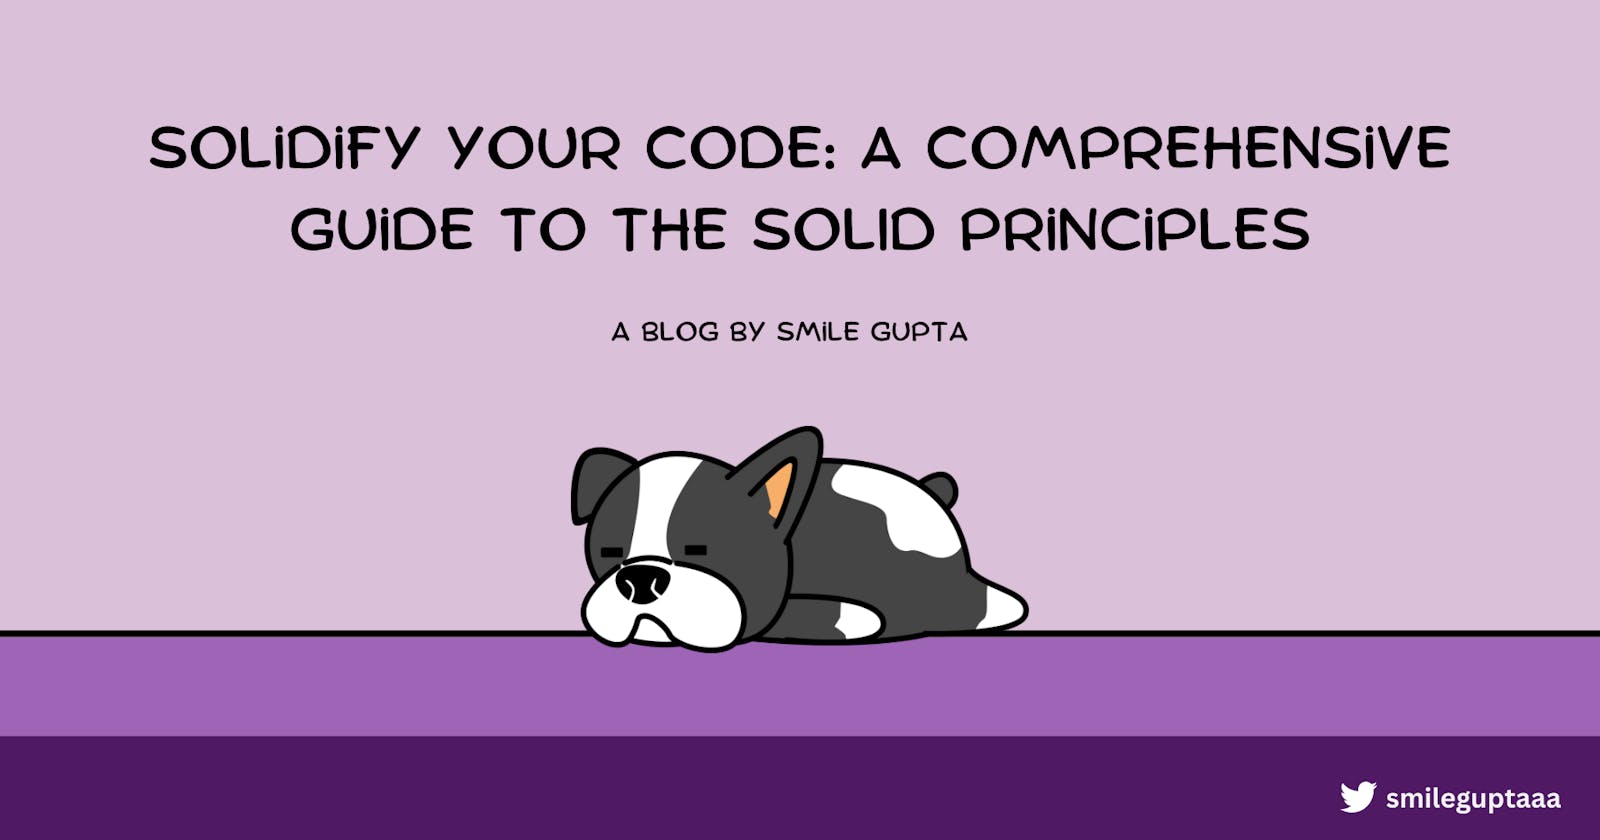 Solidify your Code: A Comprehensive Guide to the Solid Principles